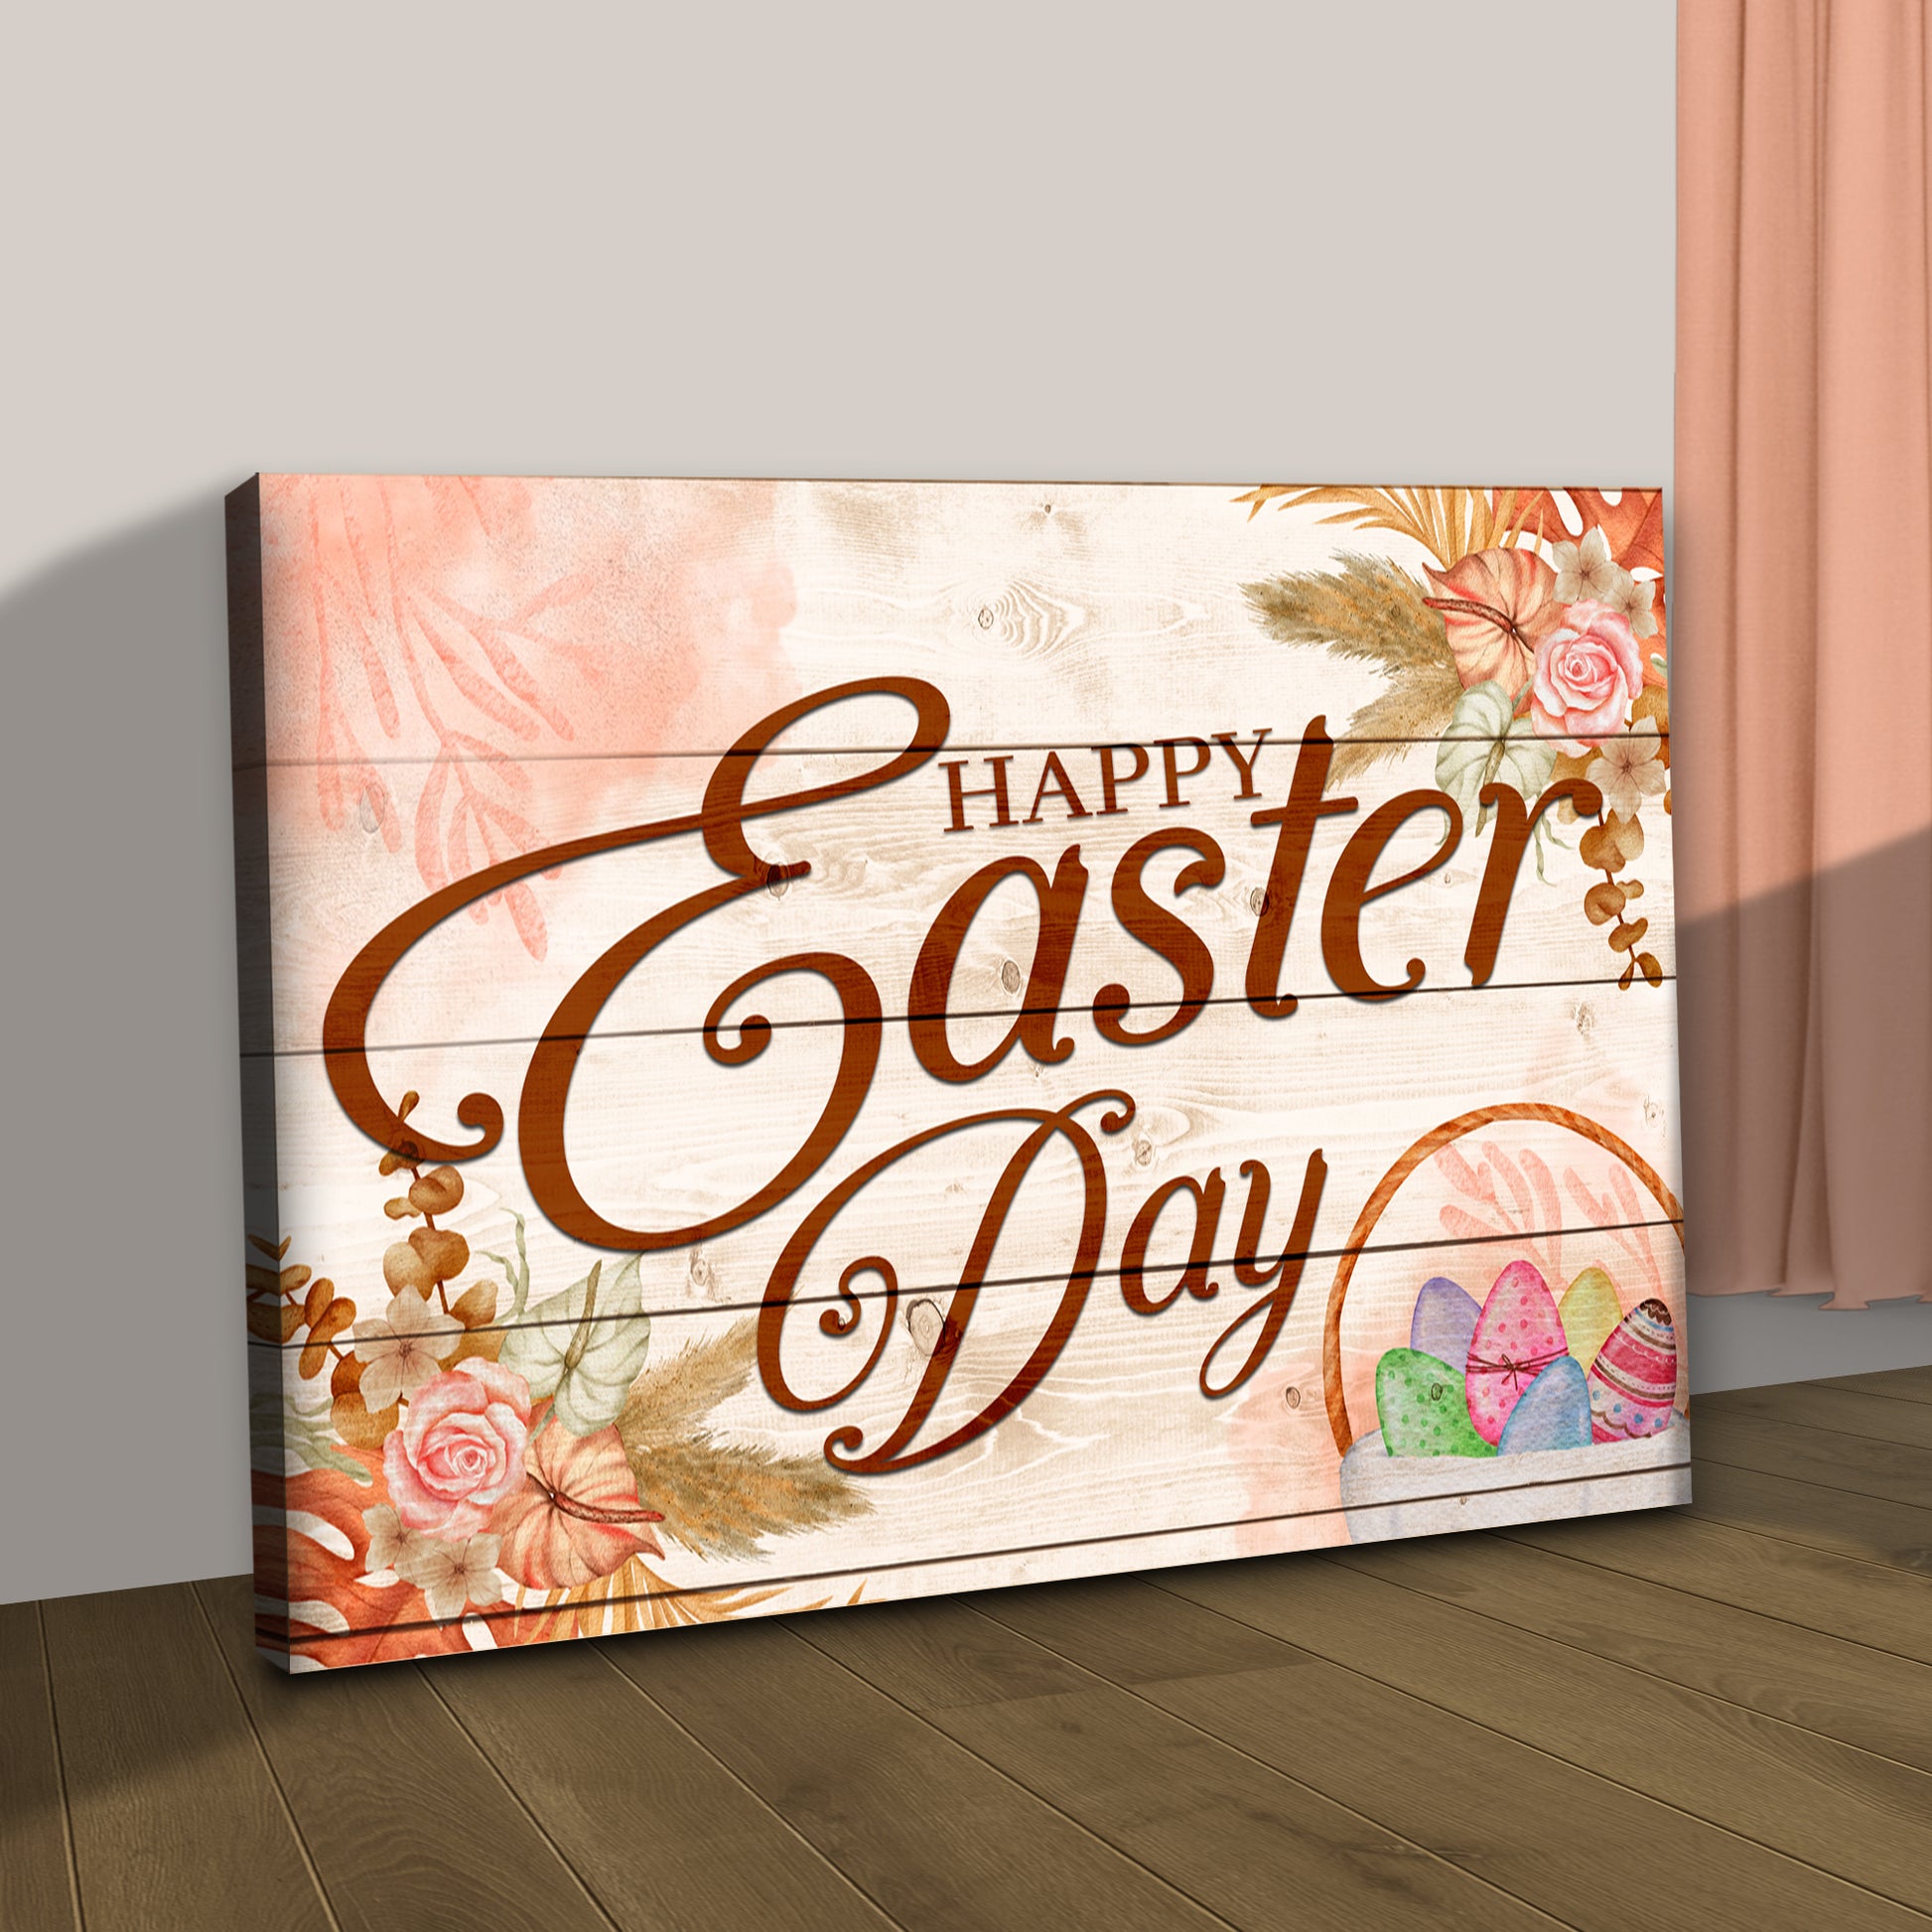 Happy Easter Greetings Sign Style 2 - Image by Tailored Canvases